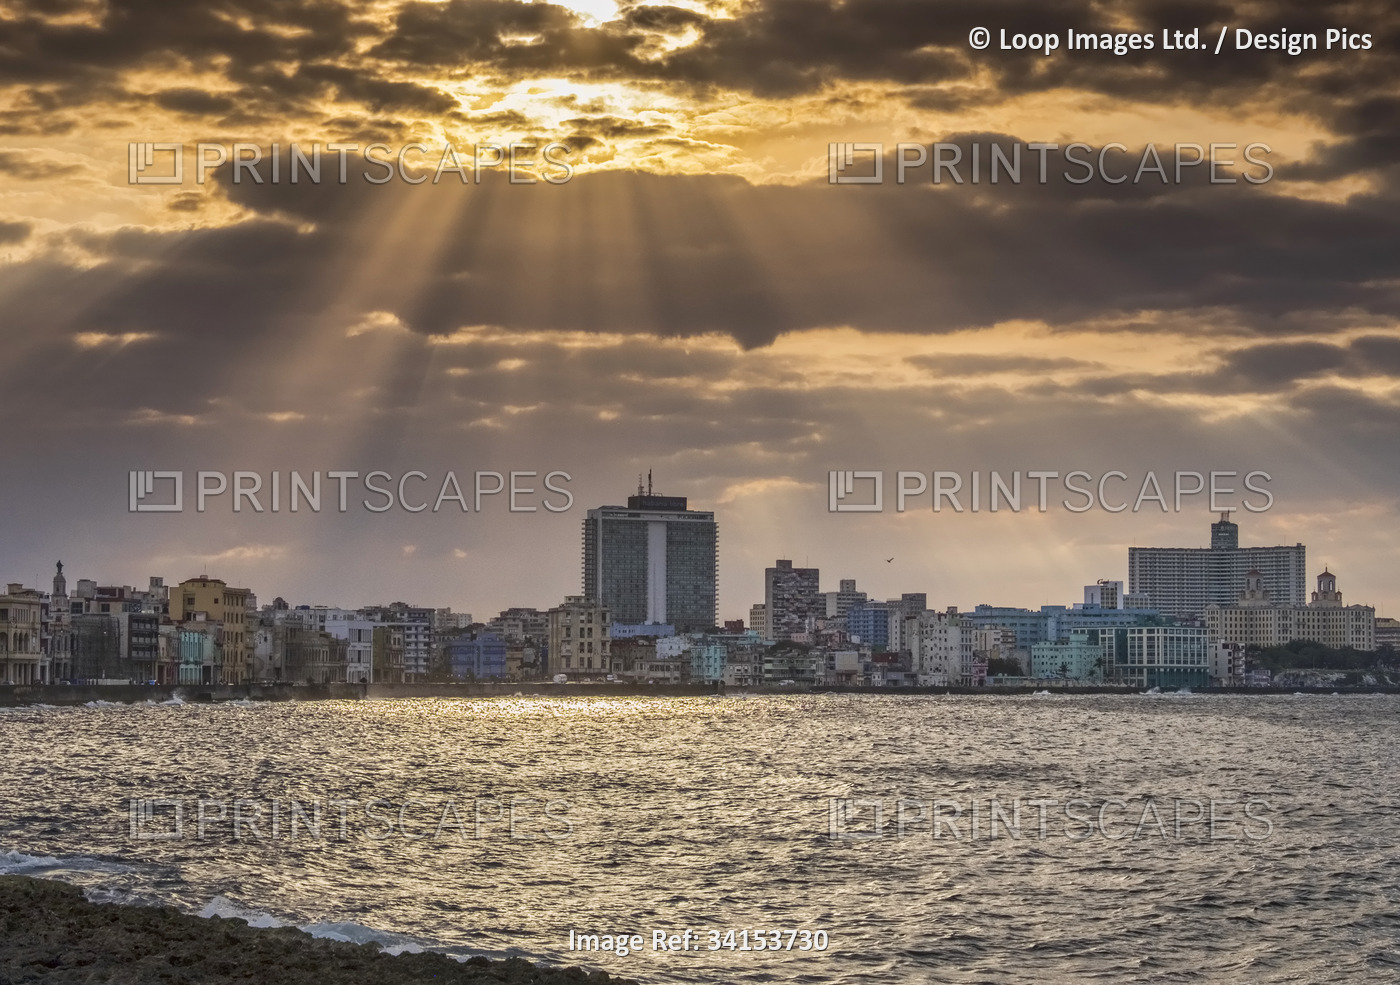 Sunburst and crepuscular rays over The Malecon in Havana.